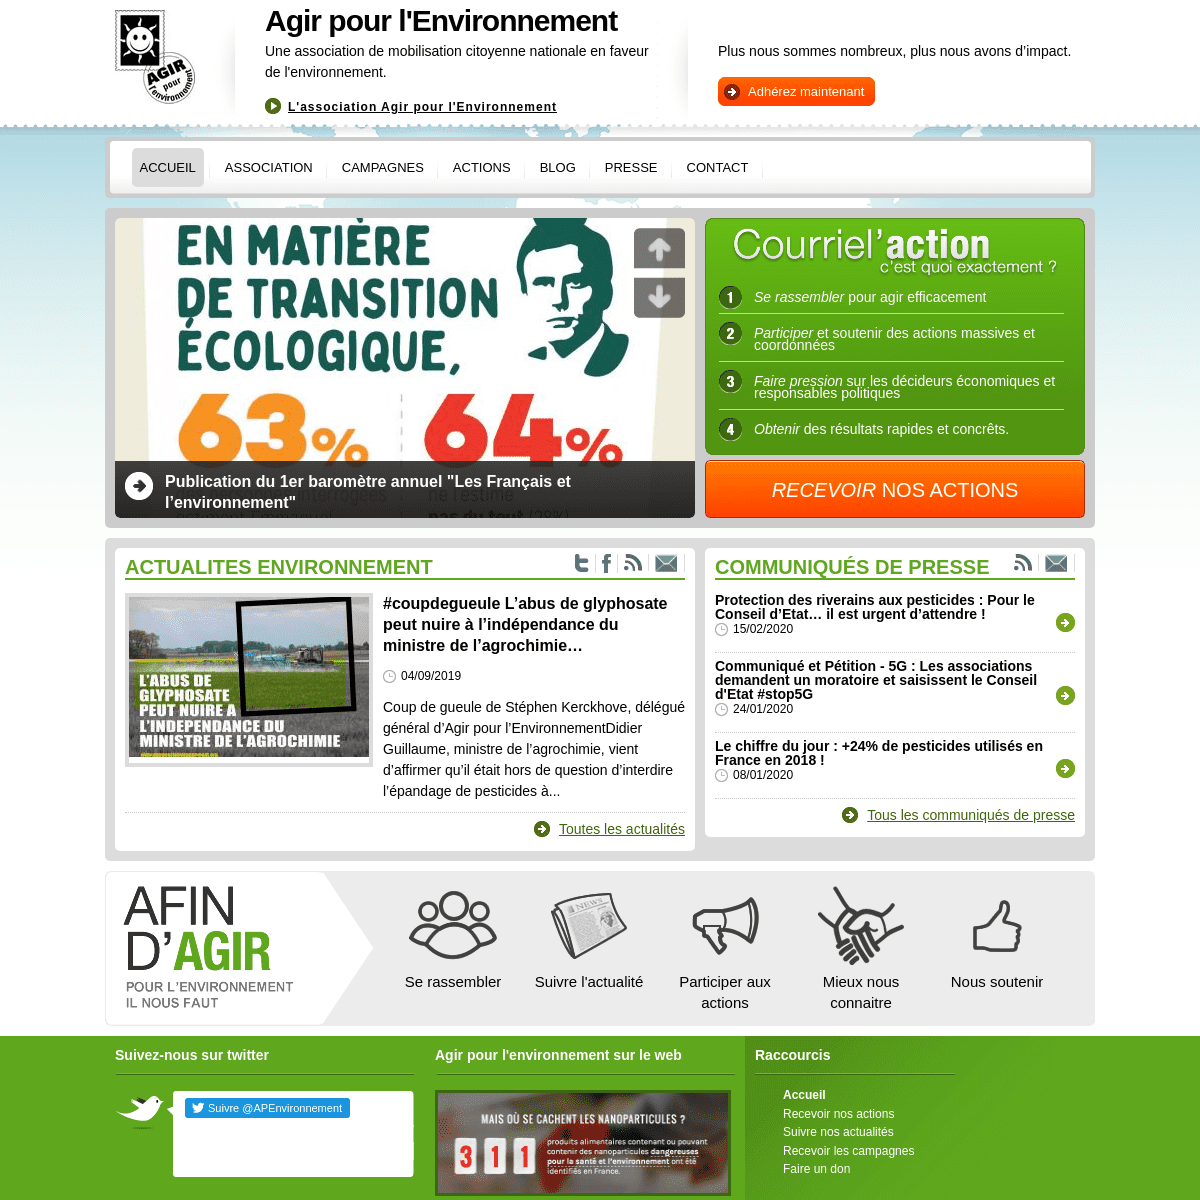 A complete backup of agirpourlenvironnement.org